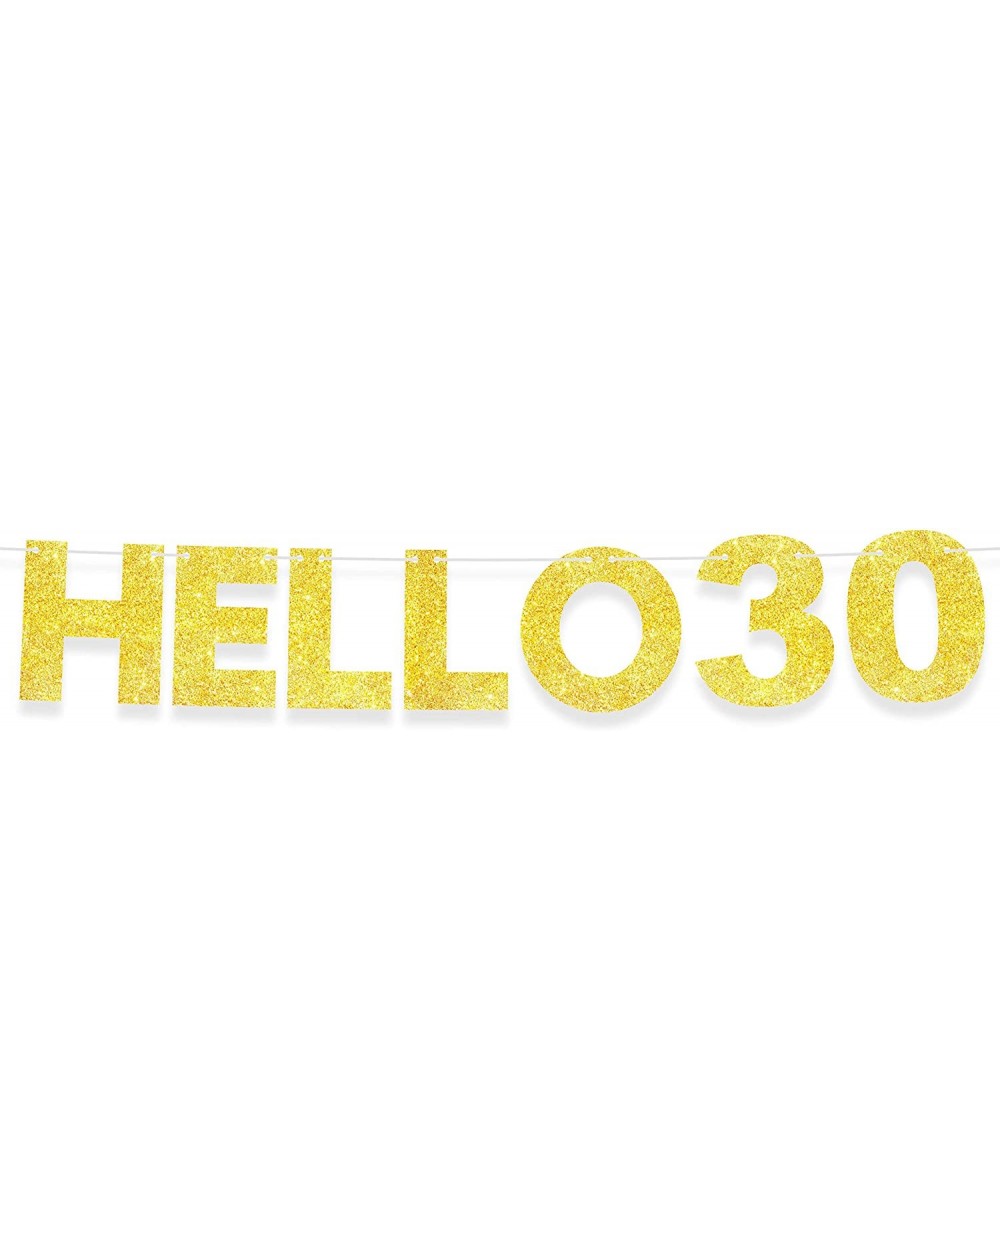 Banners Hello 30 Banner Happy Birthday Gold Glitter Theme Party Decor Picks for 30th Years Old Birthday Bunting Garland Decor...